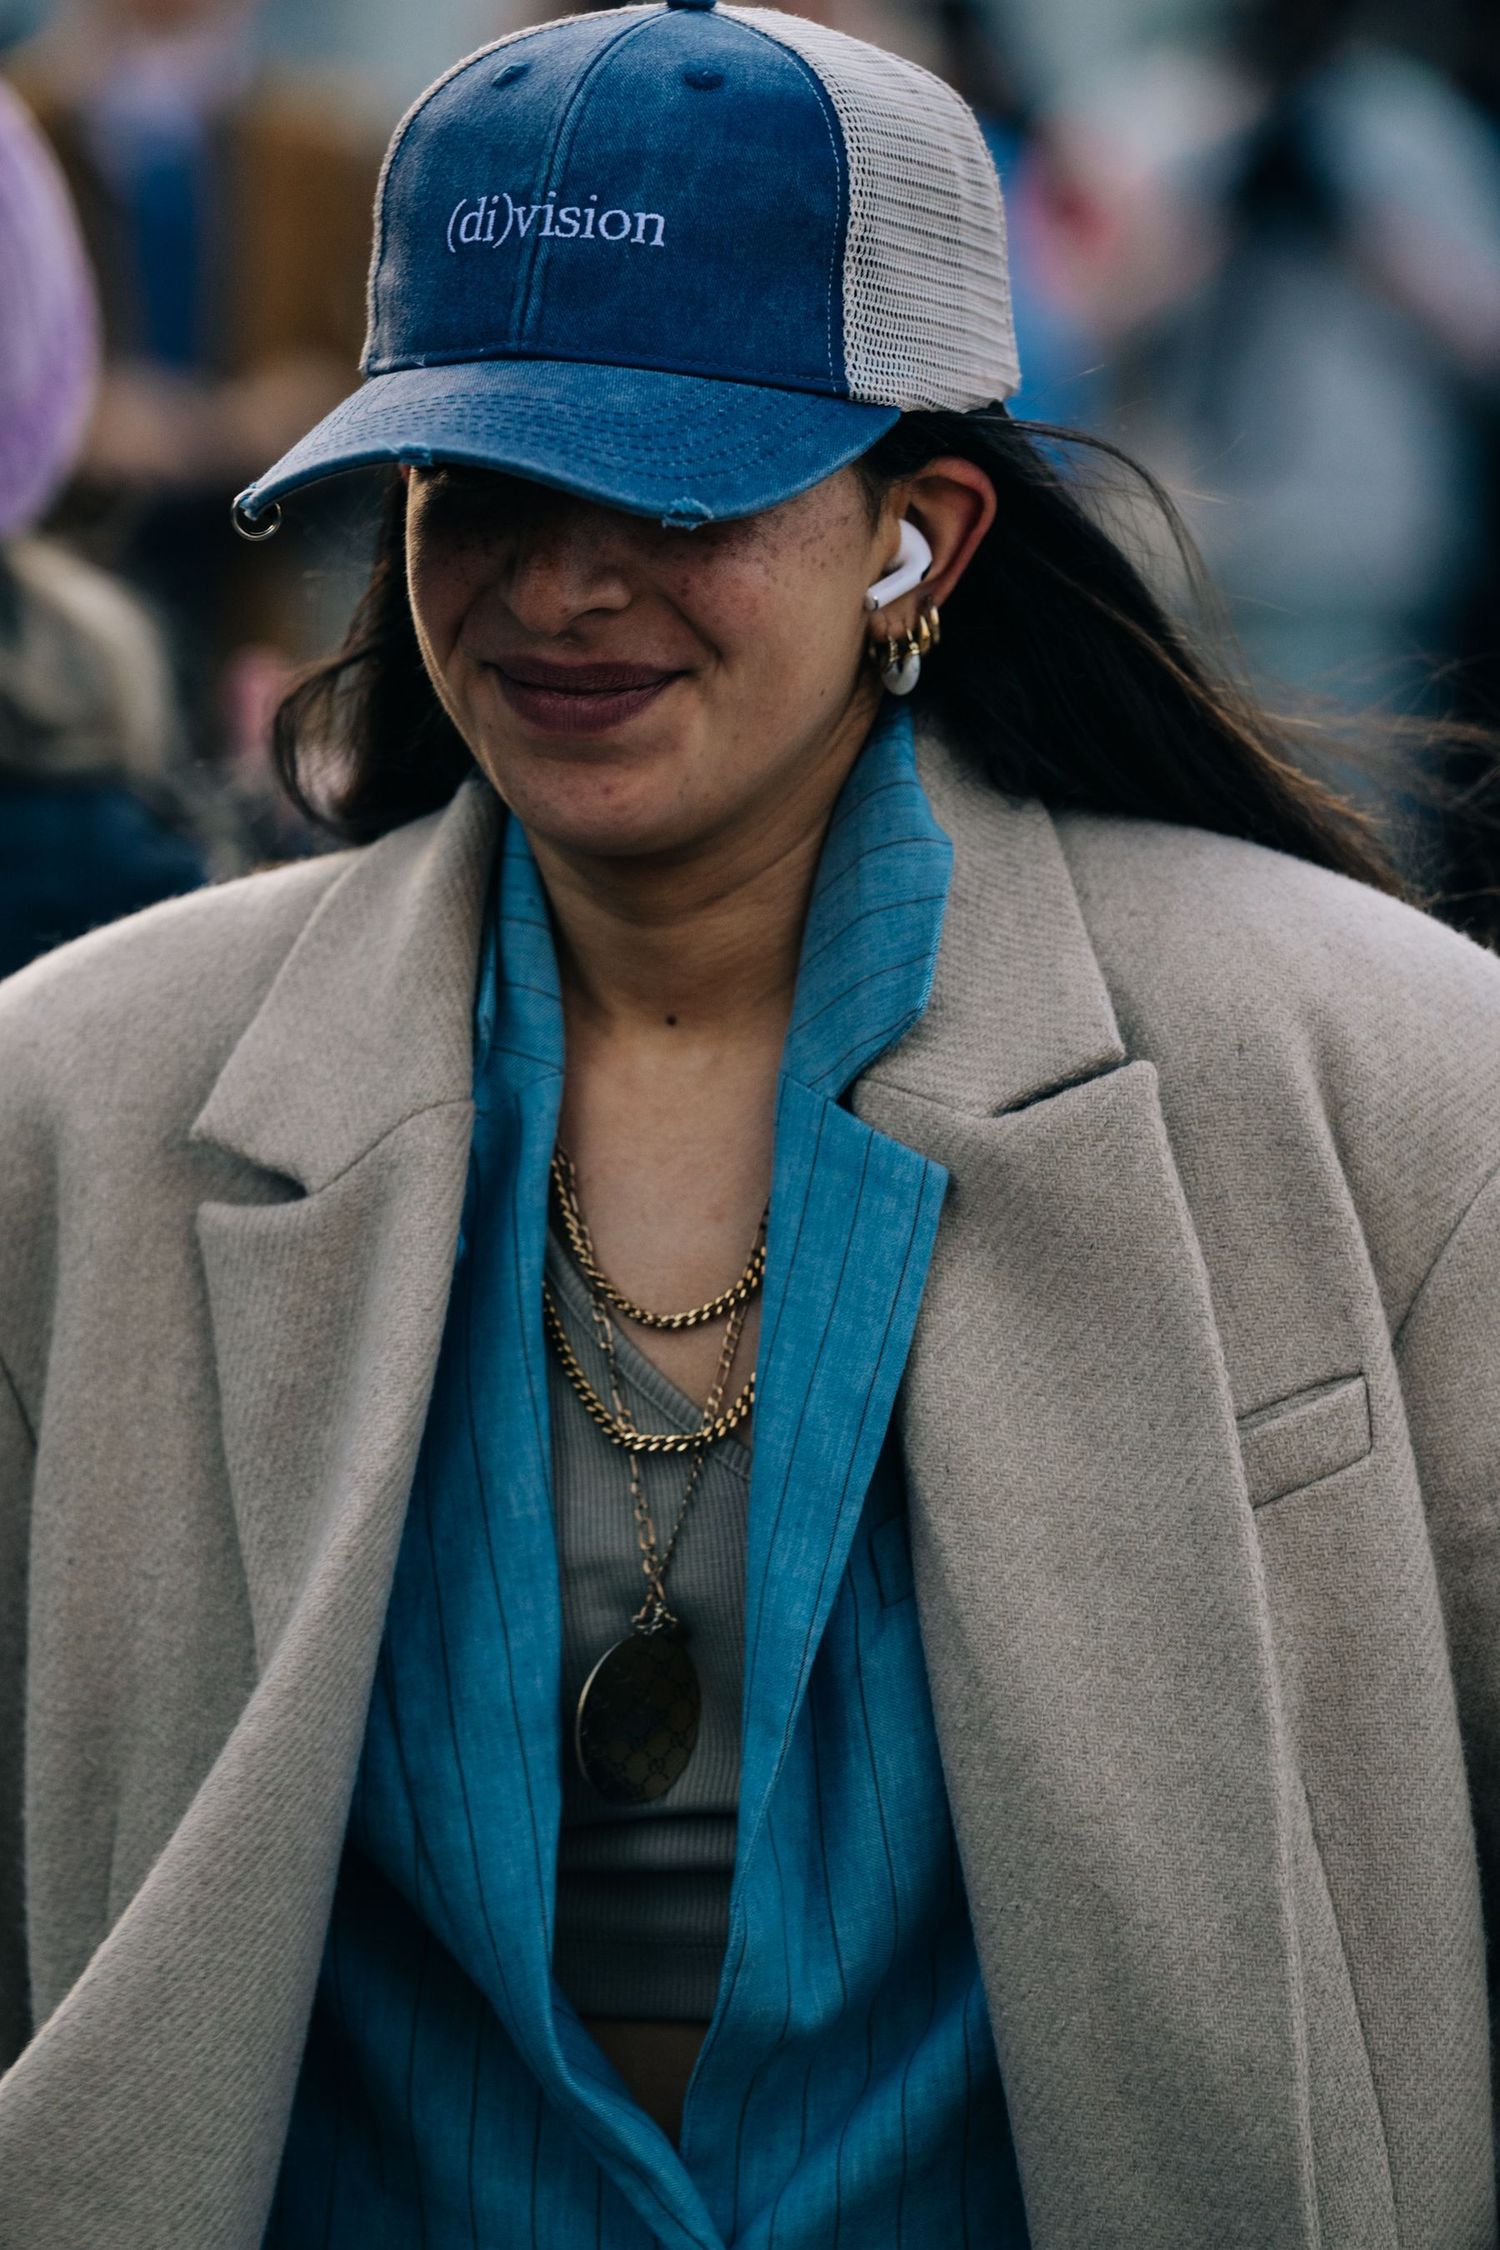 Baseball Caps Were the Street Style Crowd's Favorite Accessory - Fashionista